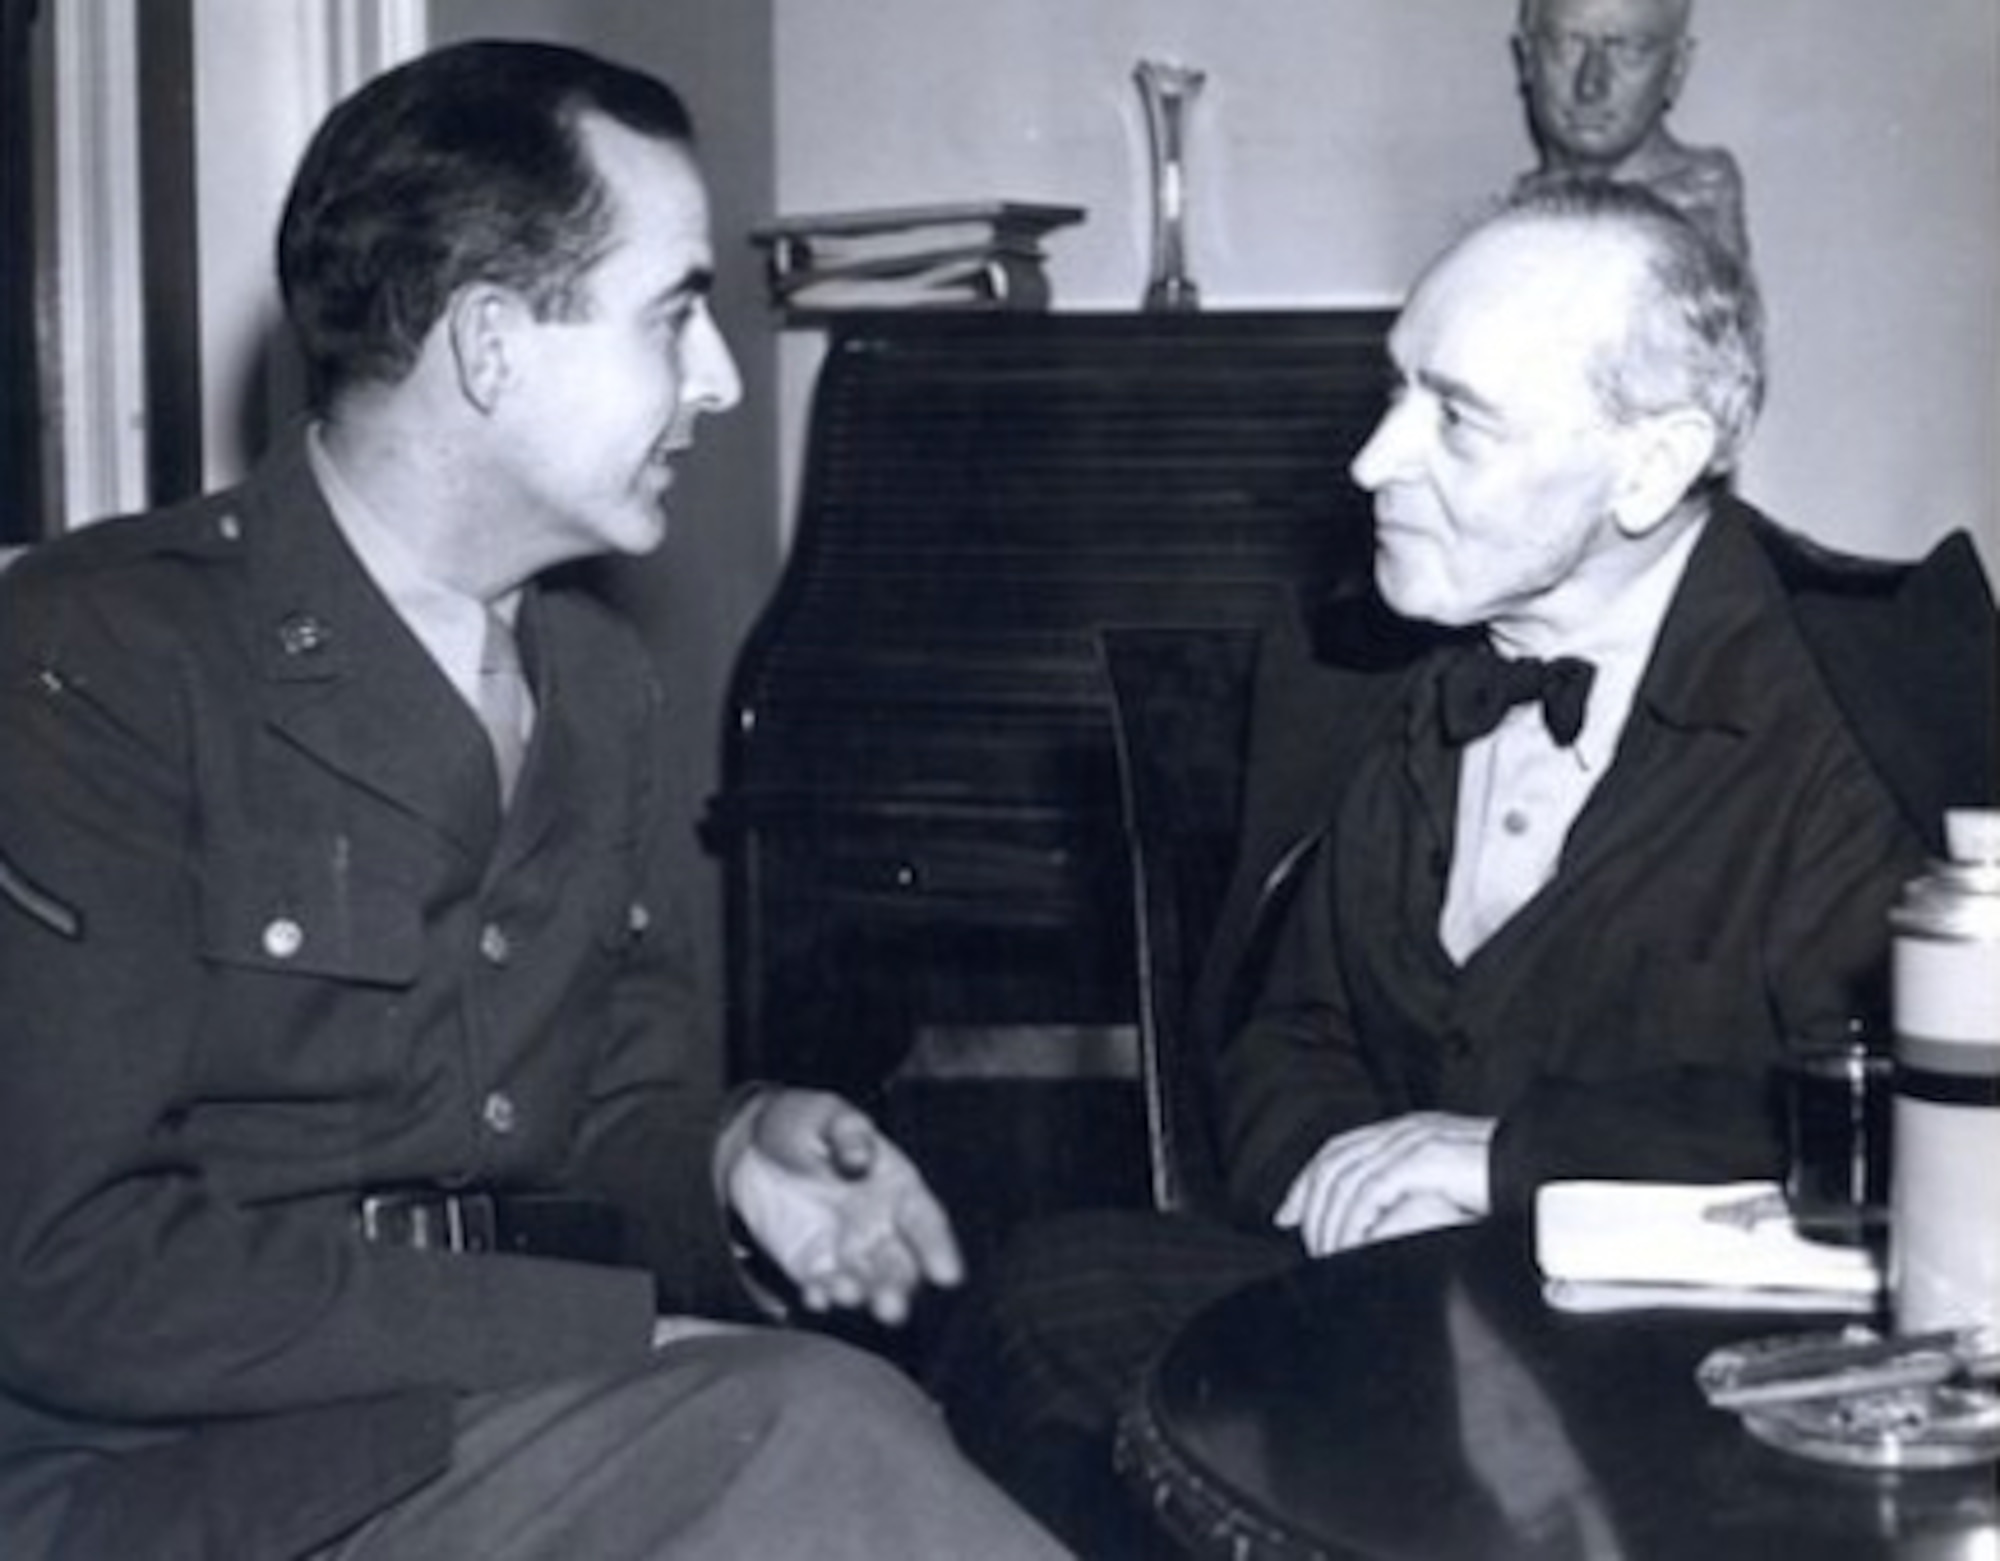 Army Air Forces Cpl. Samuel Barber meets with Boston Symphony conductor
Serge Koussevitzky in 1944. The noted American composer dedicated his second
symphony to the Army Air Forces. (U.S. Air Force photo/released)